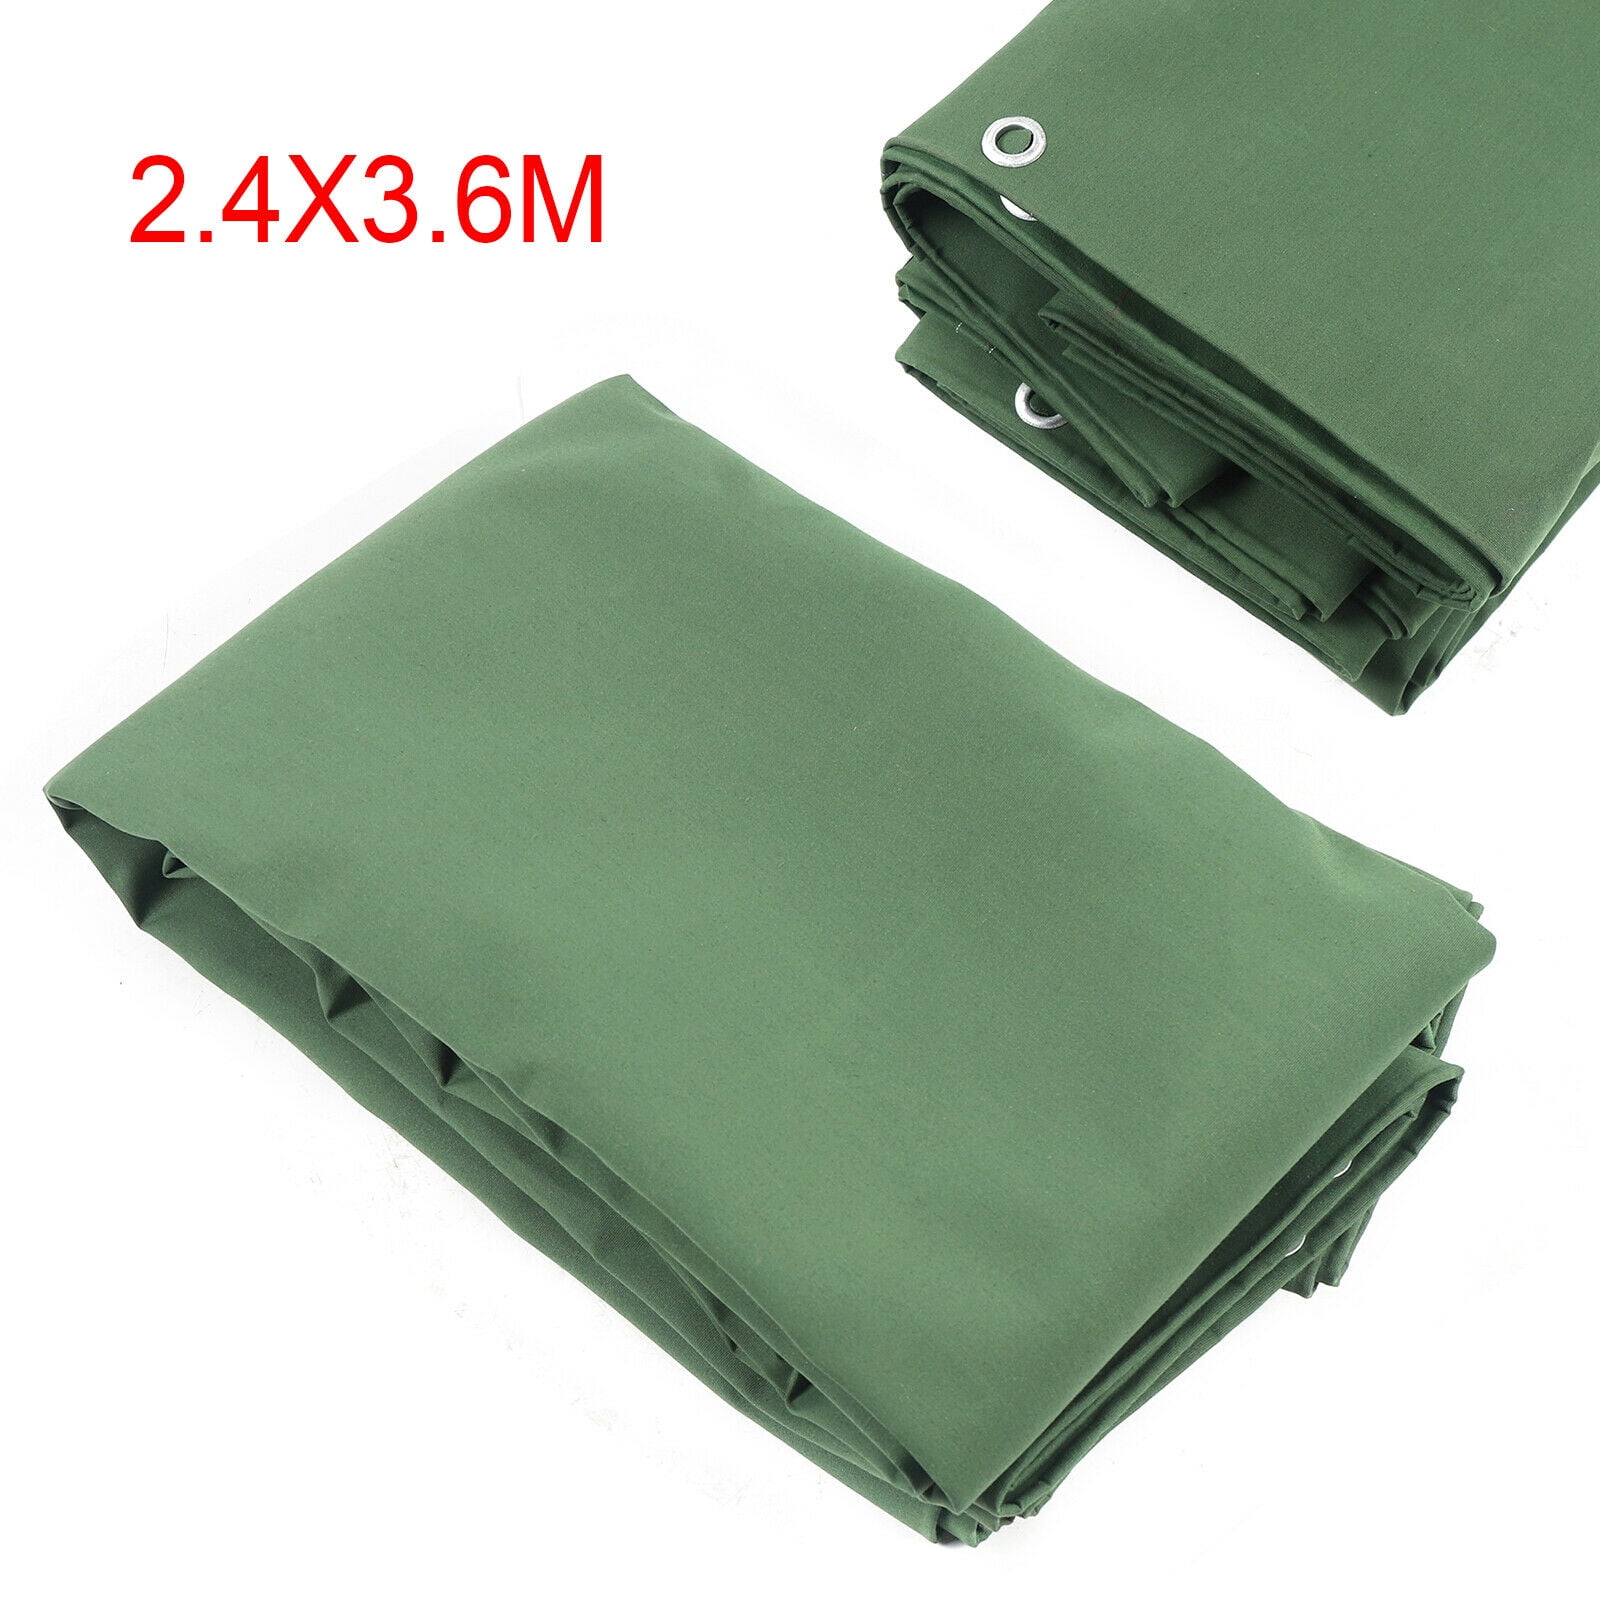 Breathable PU Coated Cotton Canvas Fabric/Army Use Tank Cover